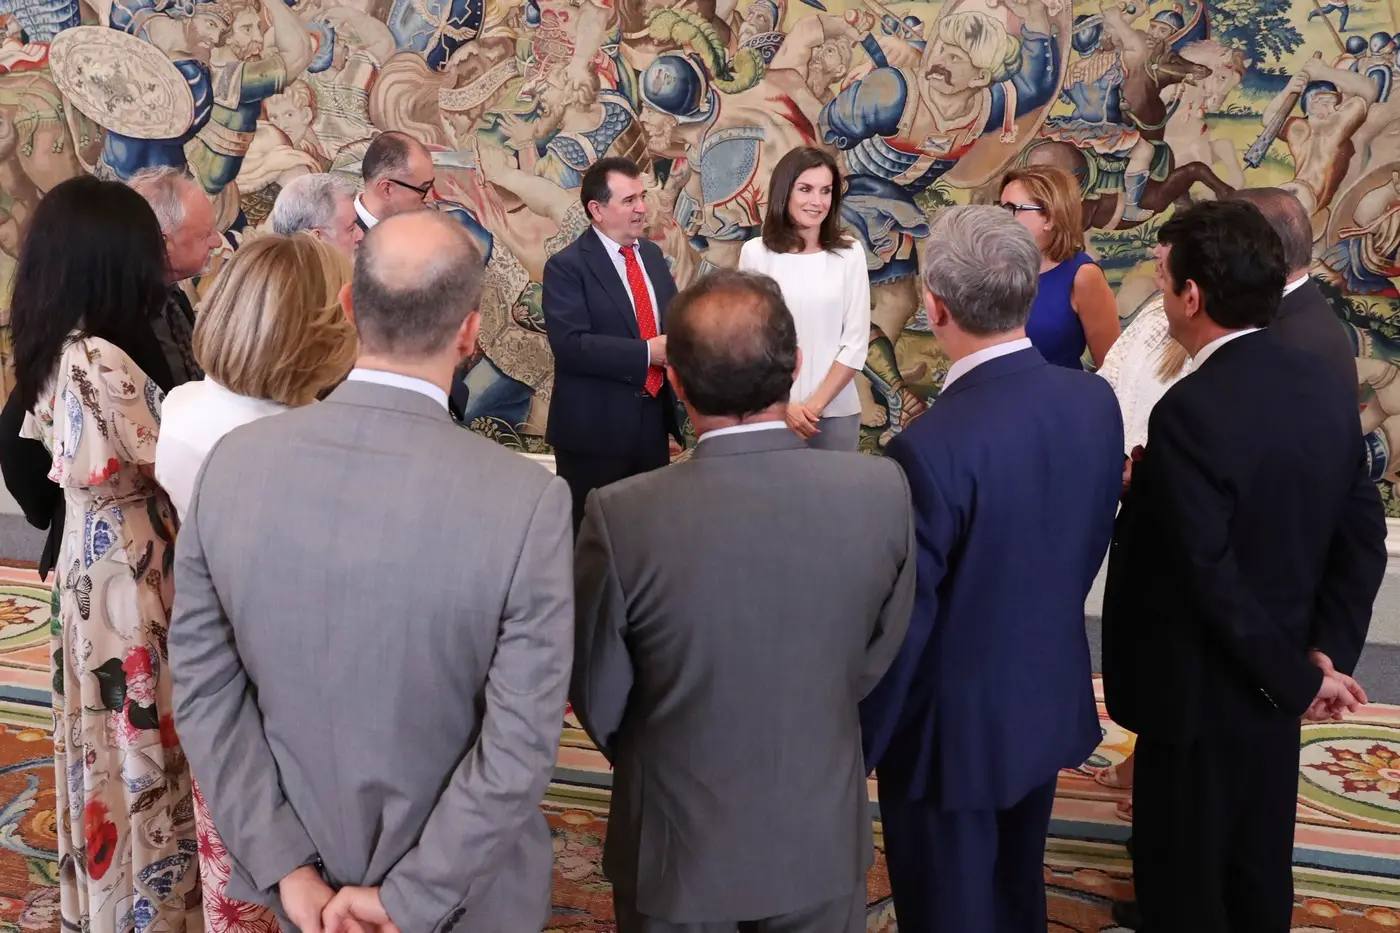 Queen Letizia received audience at palace wearing white top and blue trouser from hugoboss